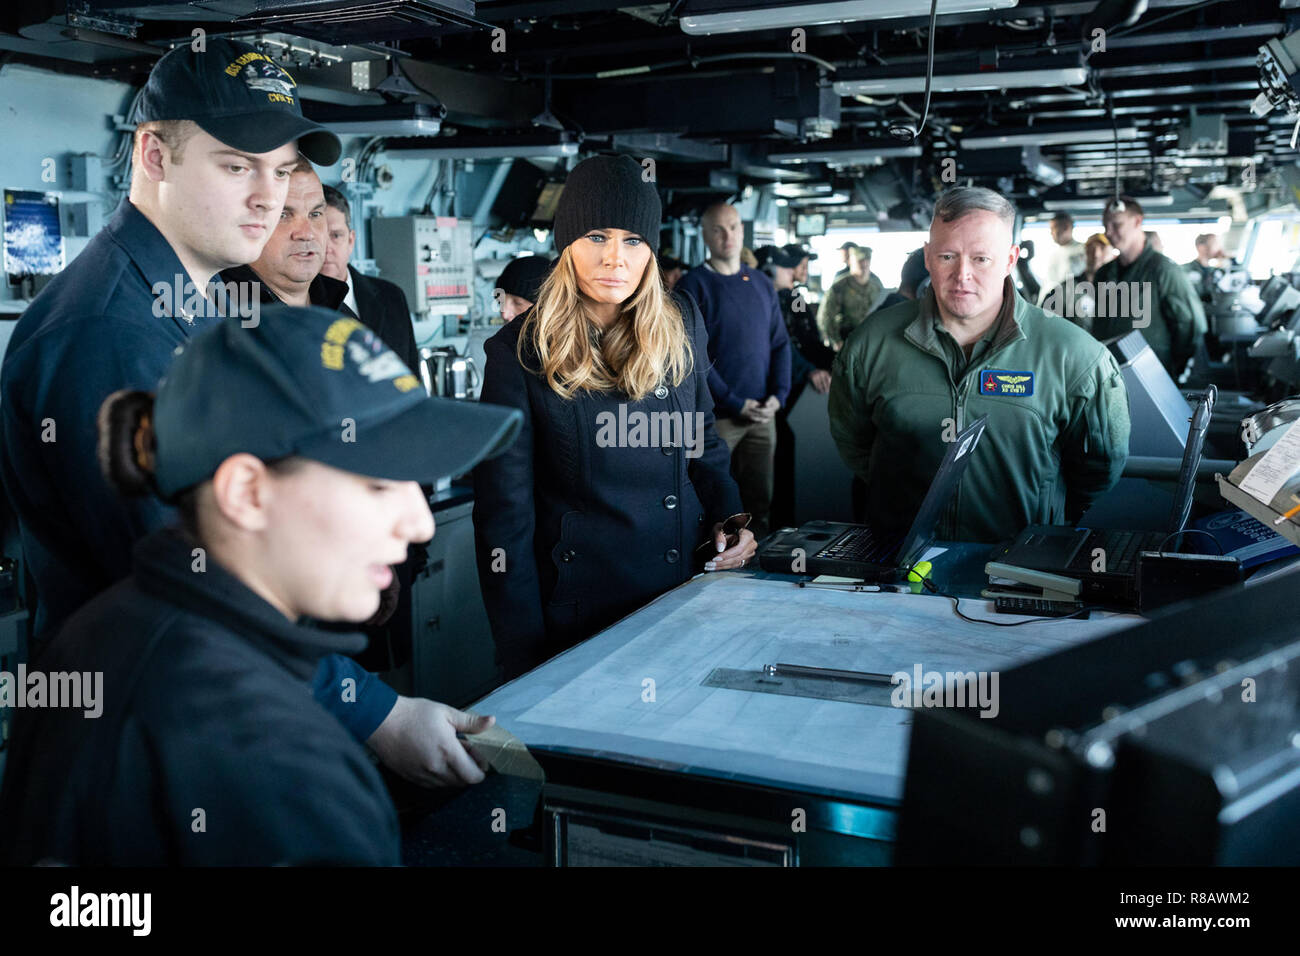 First Lady Melania Trump, joined by U.S. Navy Capt. Chris Hill, interacts  with sailors on the bridge of USS George H.W. Bush Wednesday, Dec. 12,  2018, during a holiday visit to the